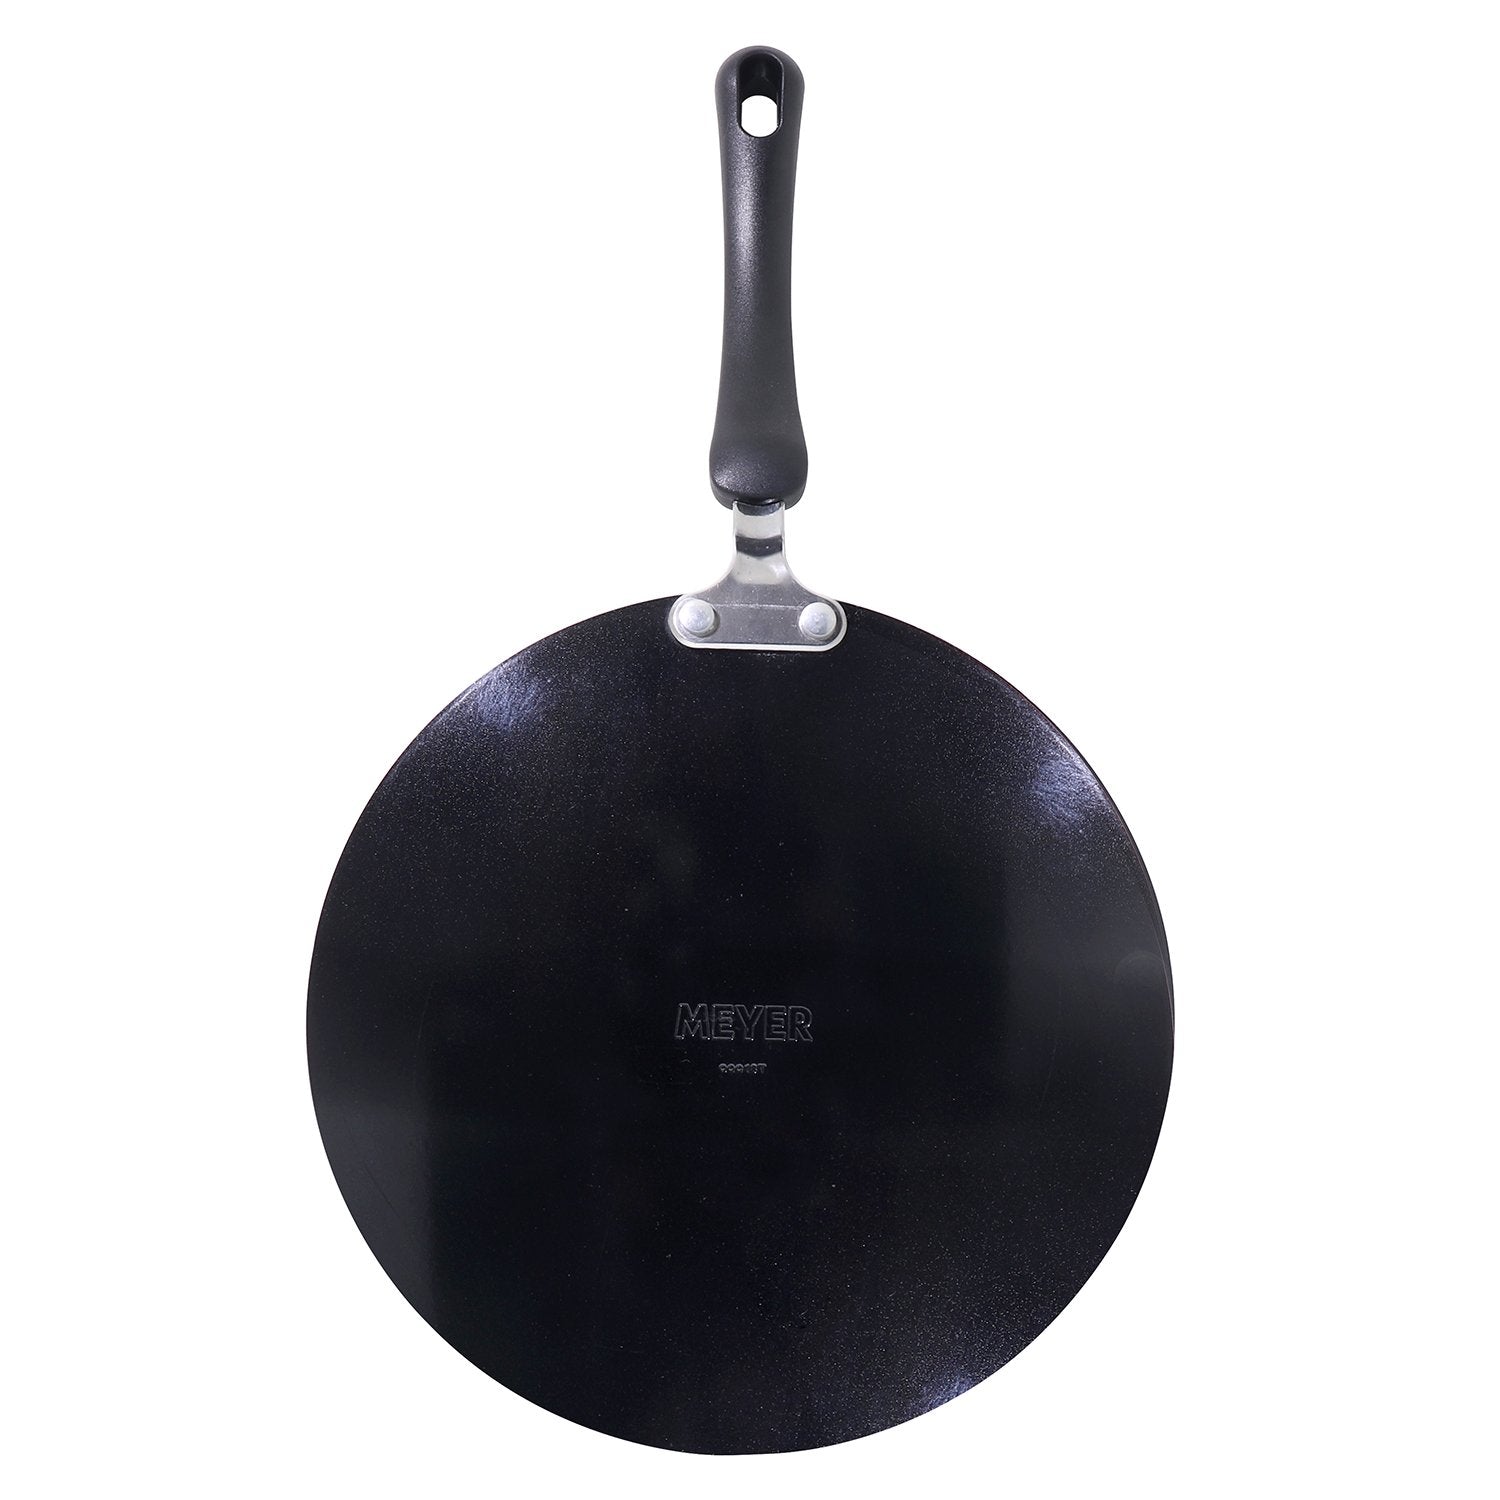 Meyer Premium Non-Stick Curved Roti Tawa, 26cm, Black (4mm thick) - Pots and Pans